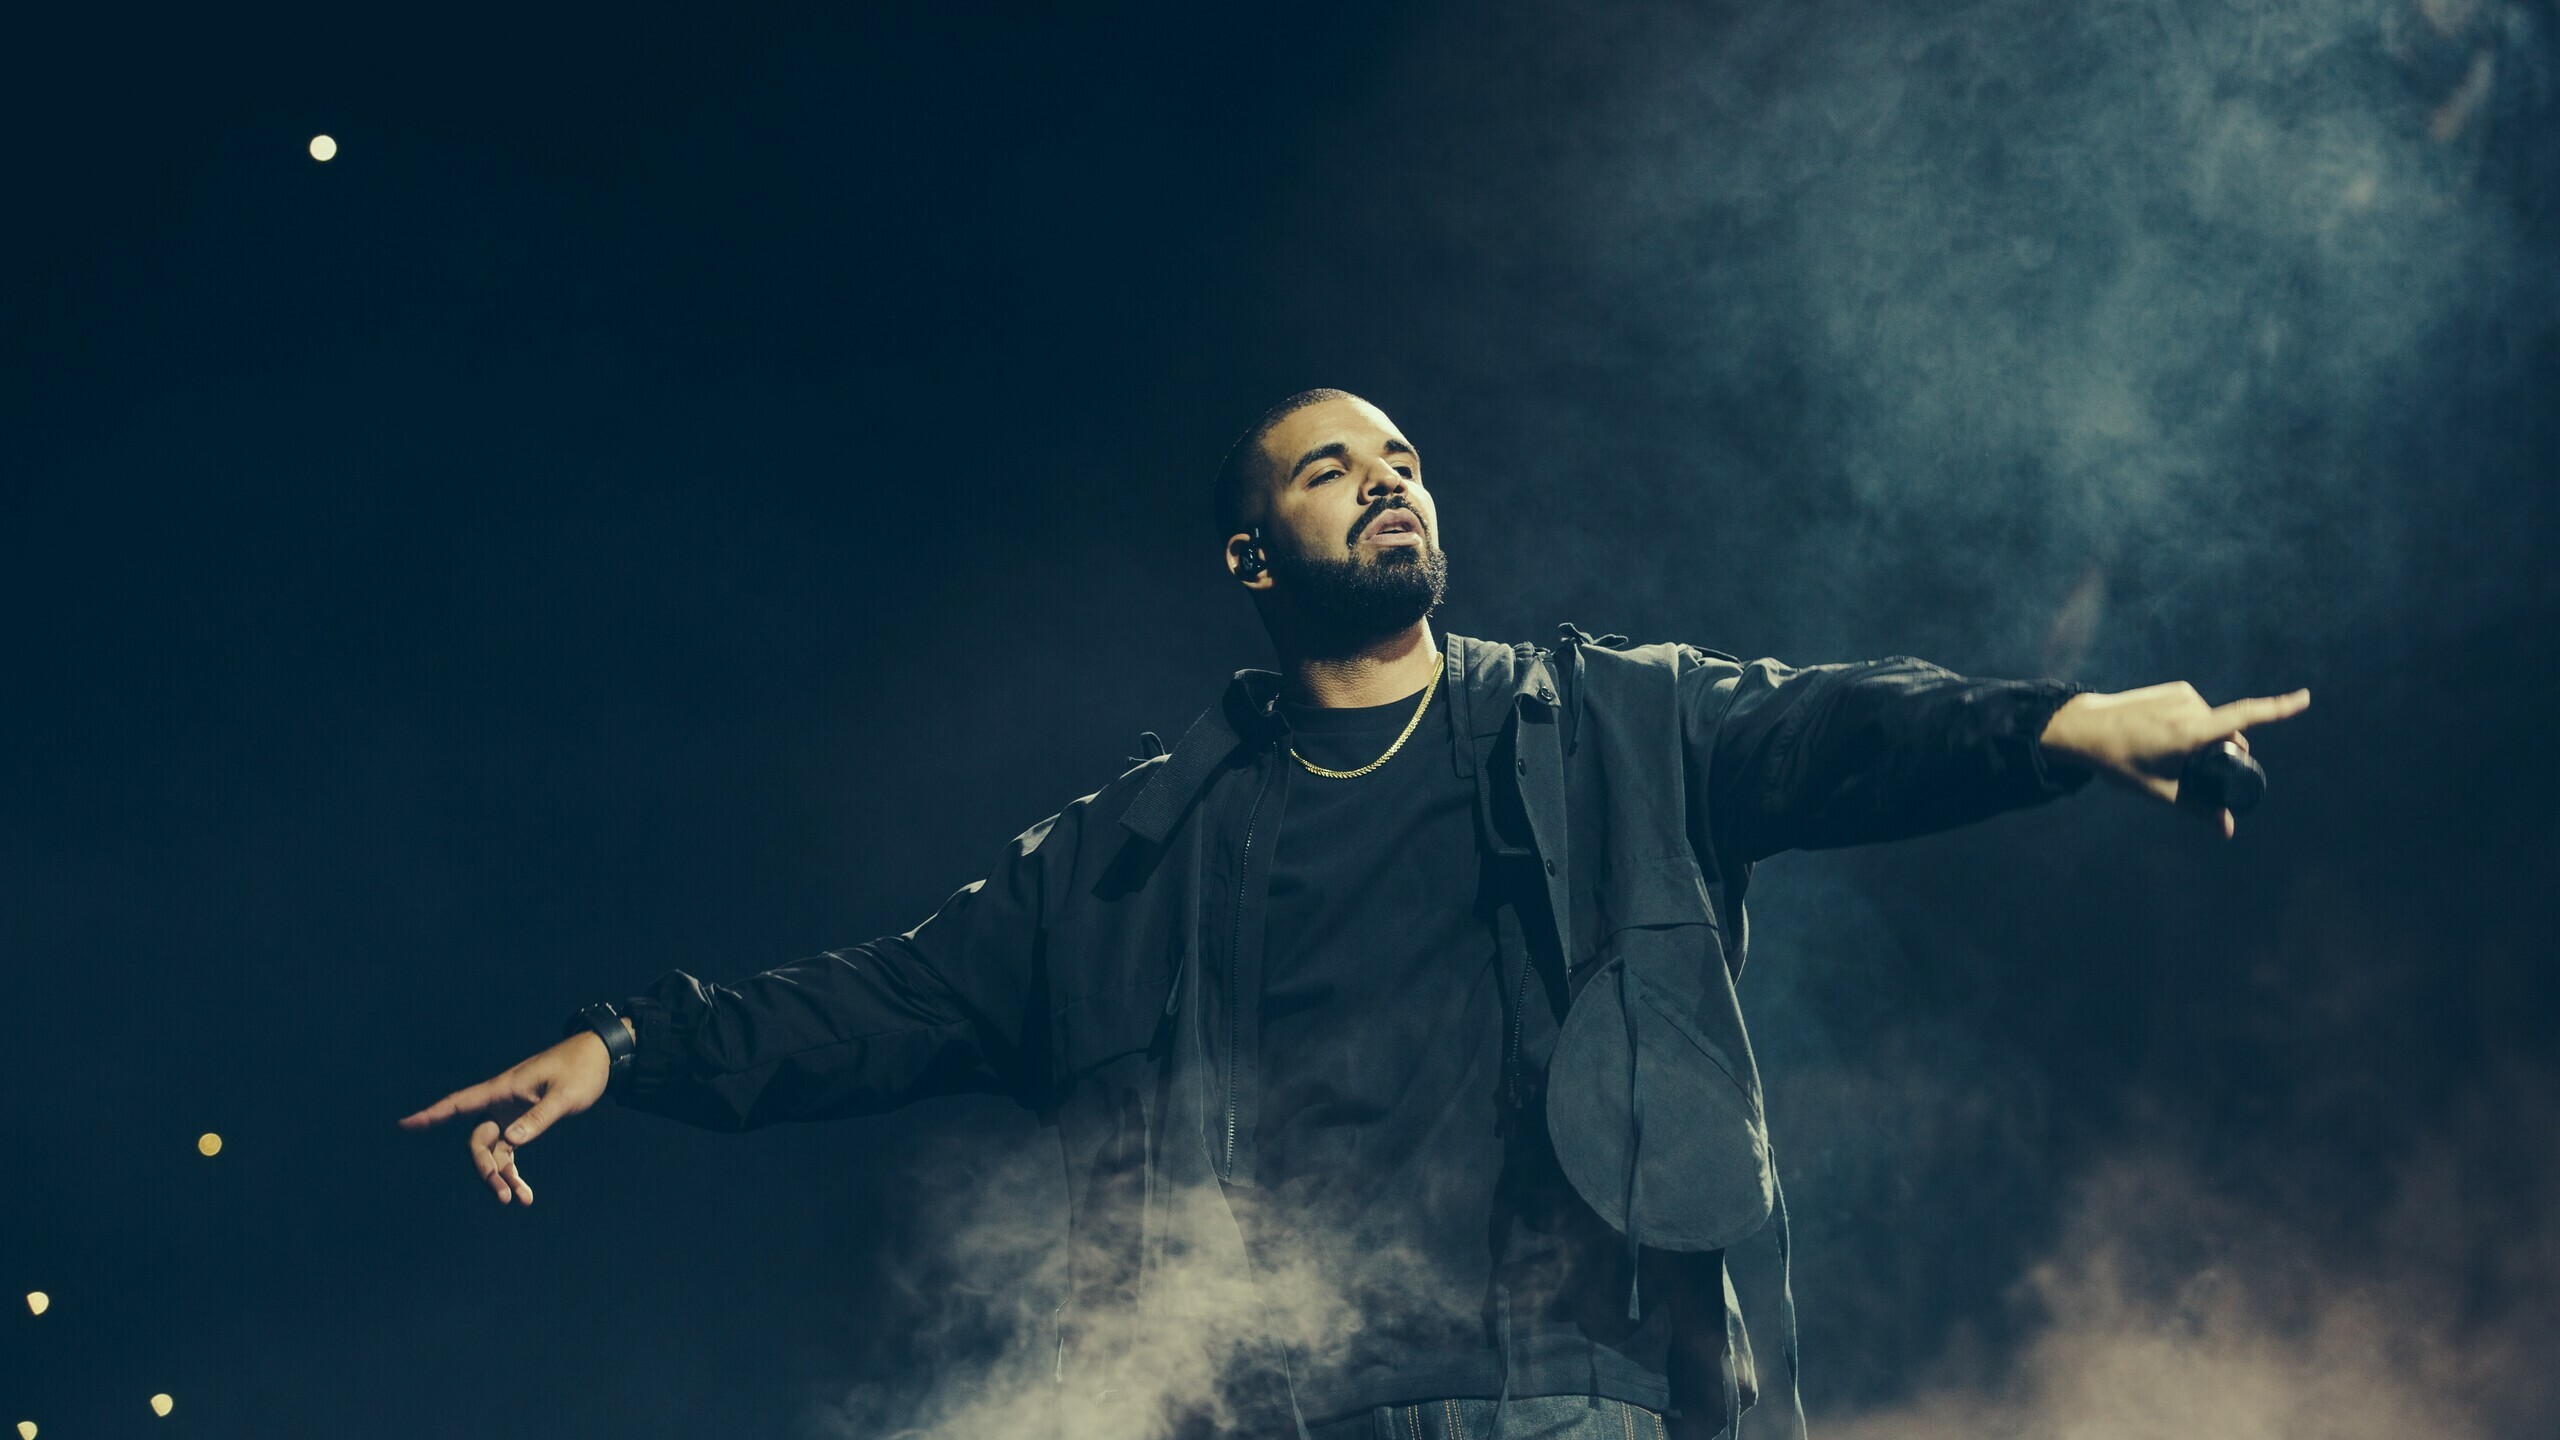 Drake: The founder of the OVO Sound record label, Collaboration with 40, 2012. 2560x1440 HD Wallpaper.